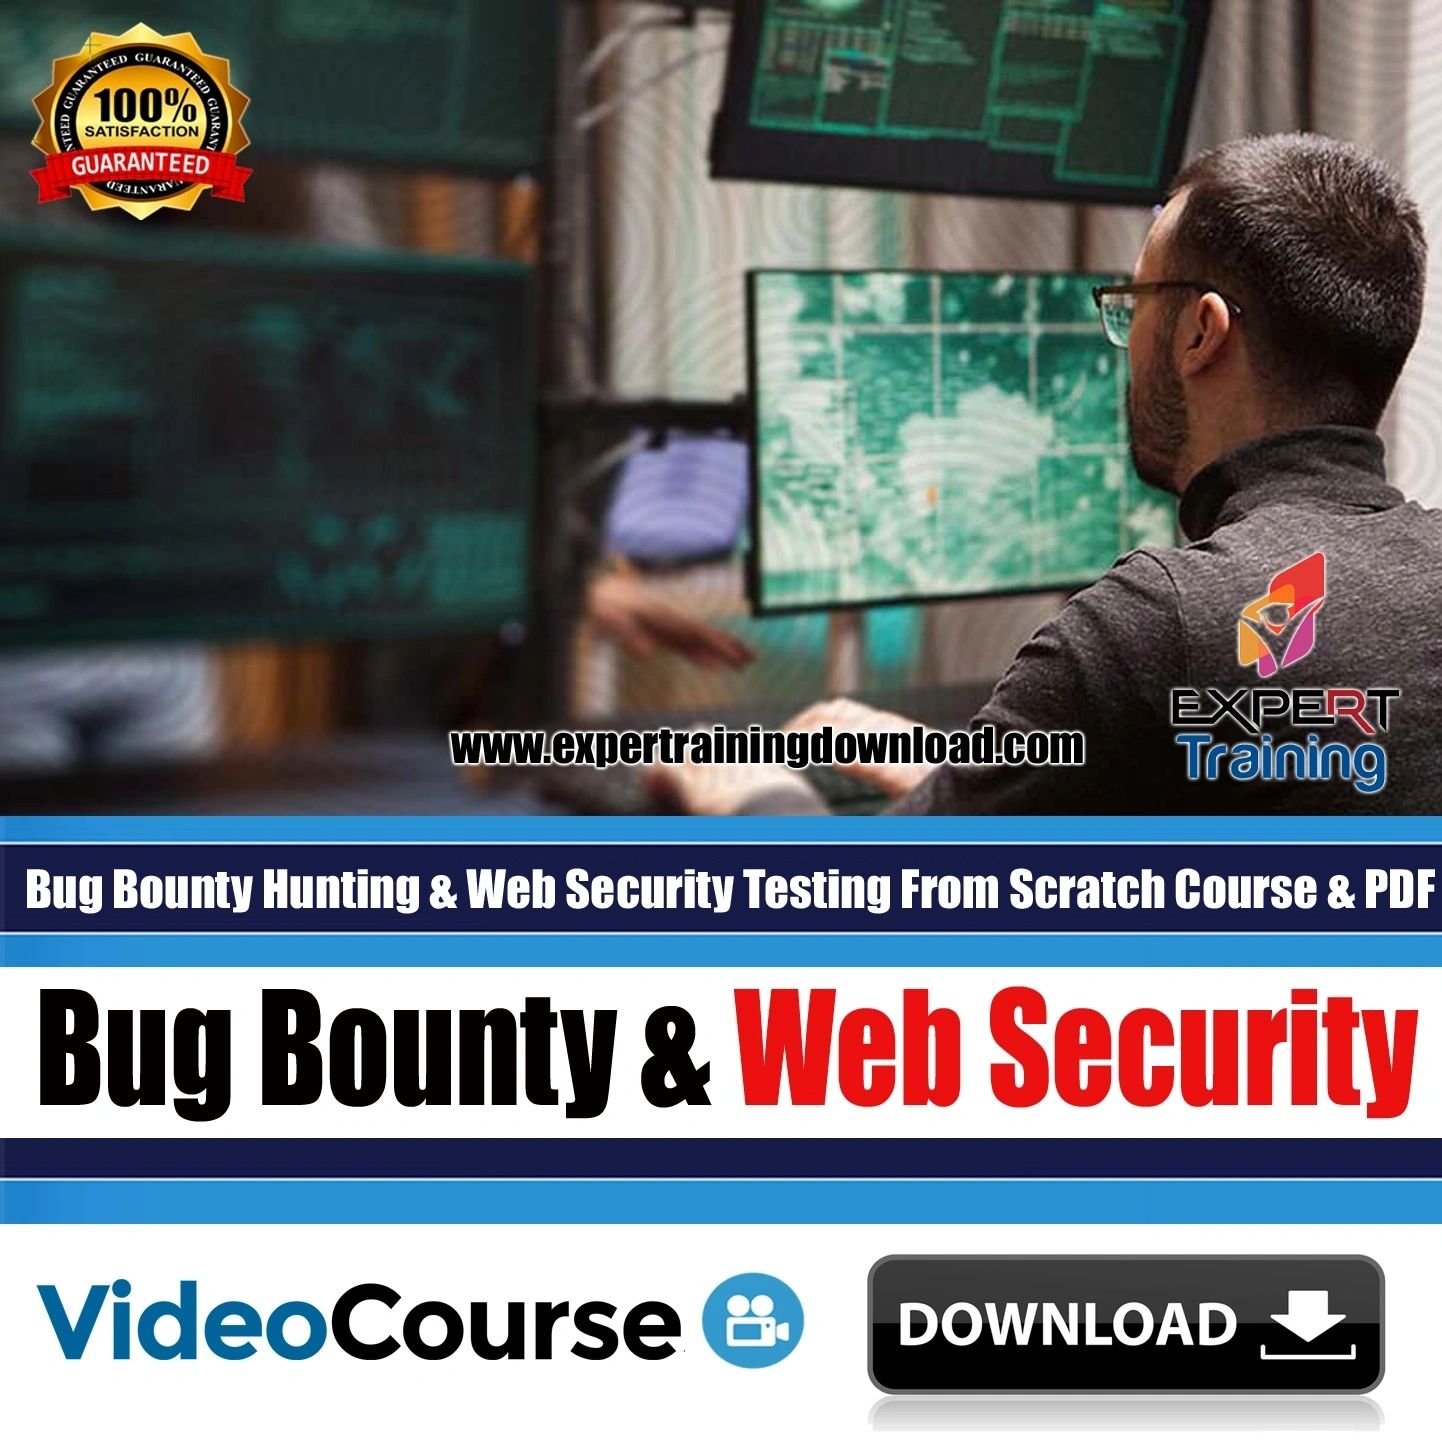 Bug Bounty Hunting & Web Security Testing From Scratch Course & PDF Guides